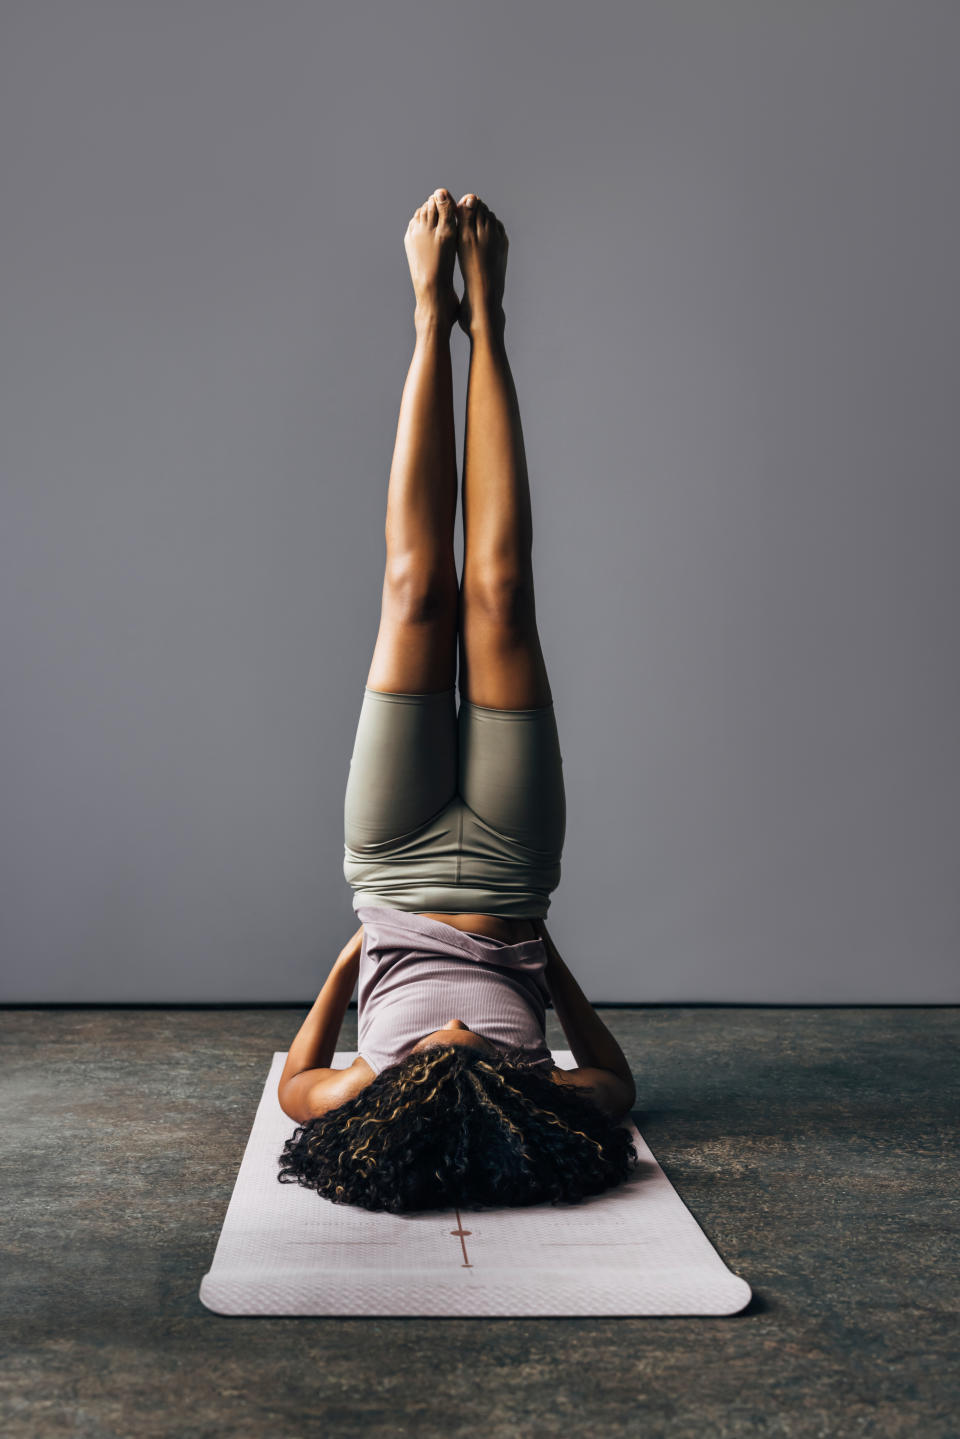 A Latin female athlete doing a handstand while being on yoga mat